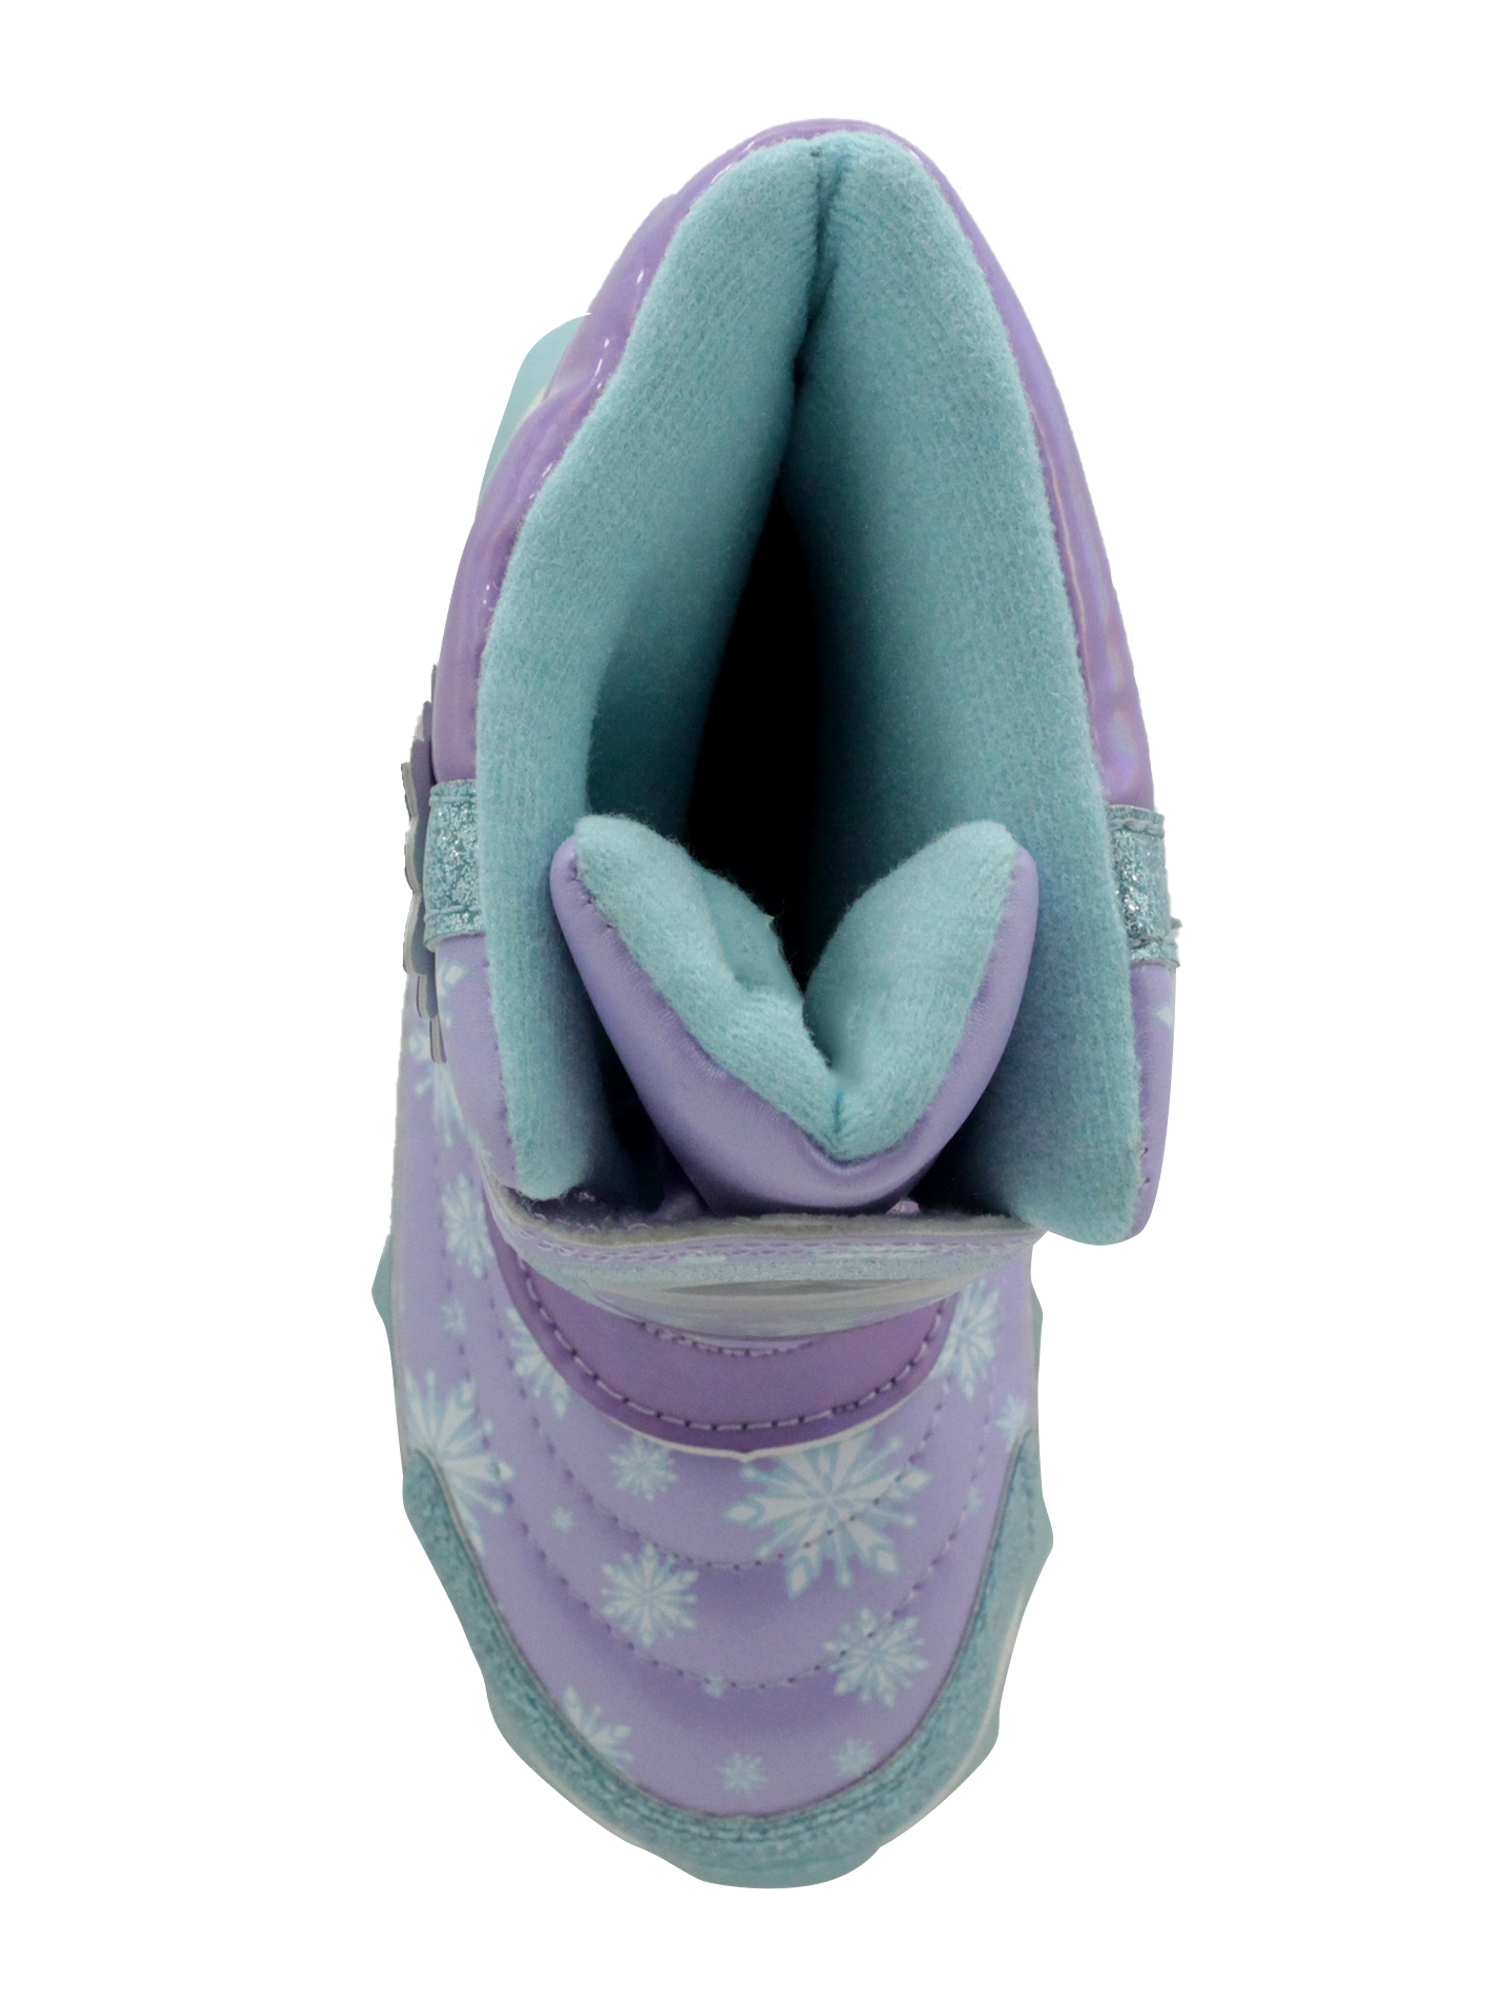 Disney Frozen 2 Bubble Snow Boot (Toddler Girls) - image 5 of 6